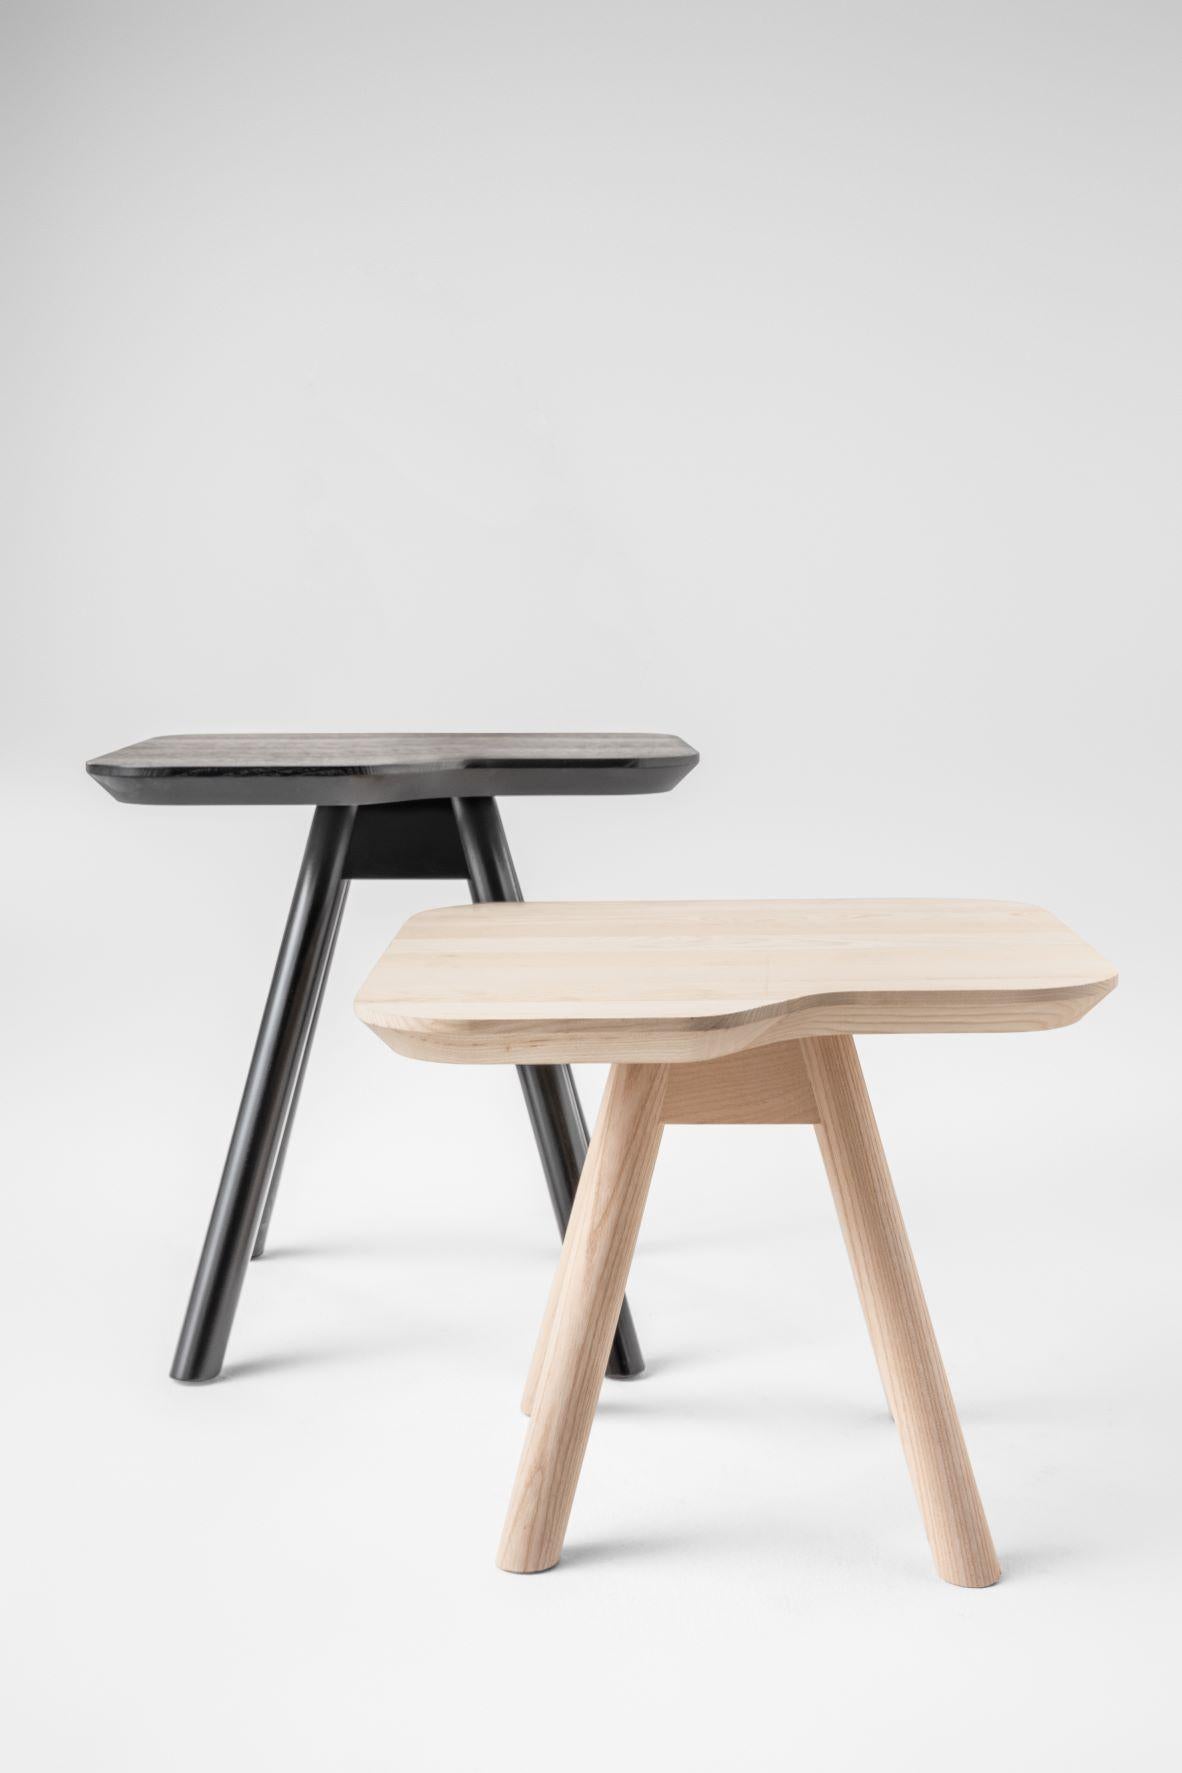 A collection of coffee tables with an irregular, rounded top and trestle legs reminiscent of the archetypal table. The Aky Small Tables enrich the living room area with a pleasantly minimal look, featuring calibrated dimensions and striking